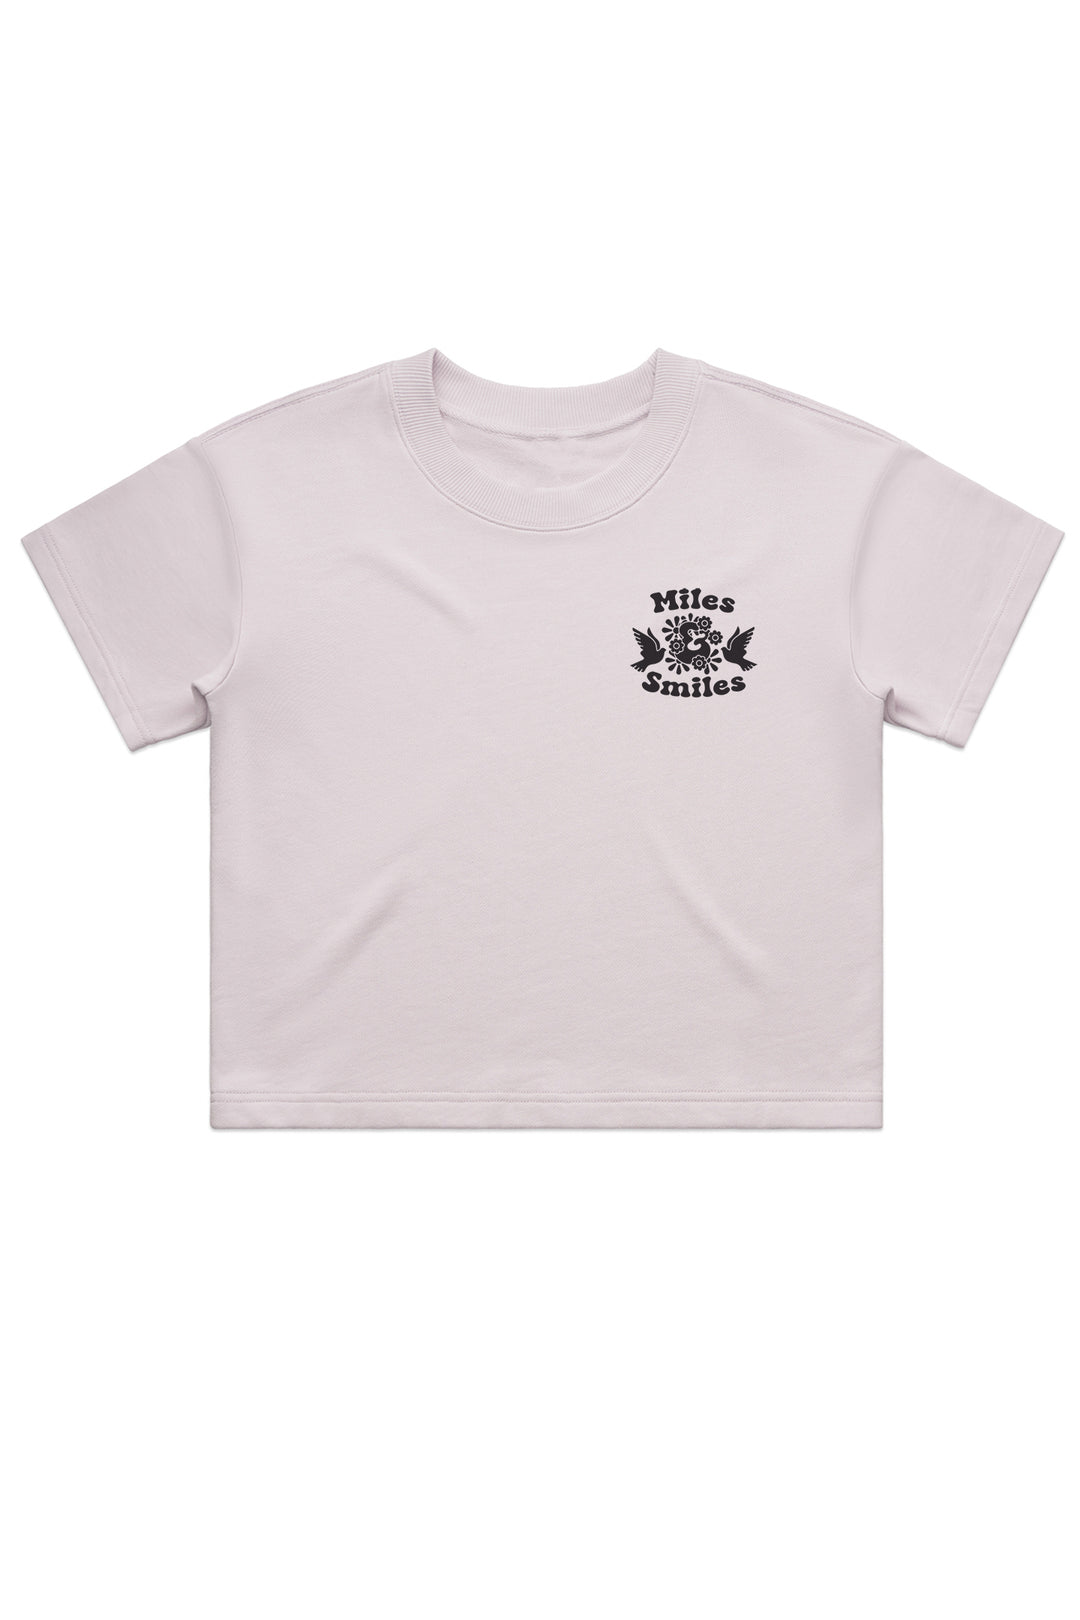 Miles & Smiles Lux Terry T-shirt